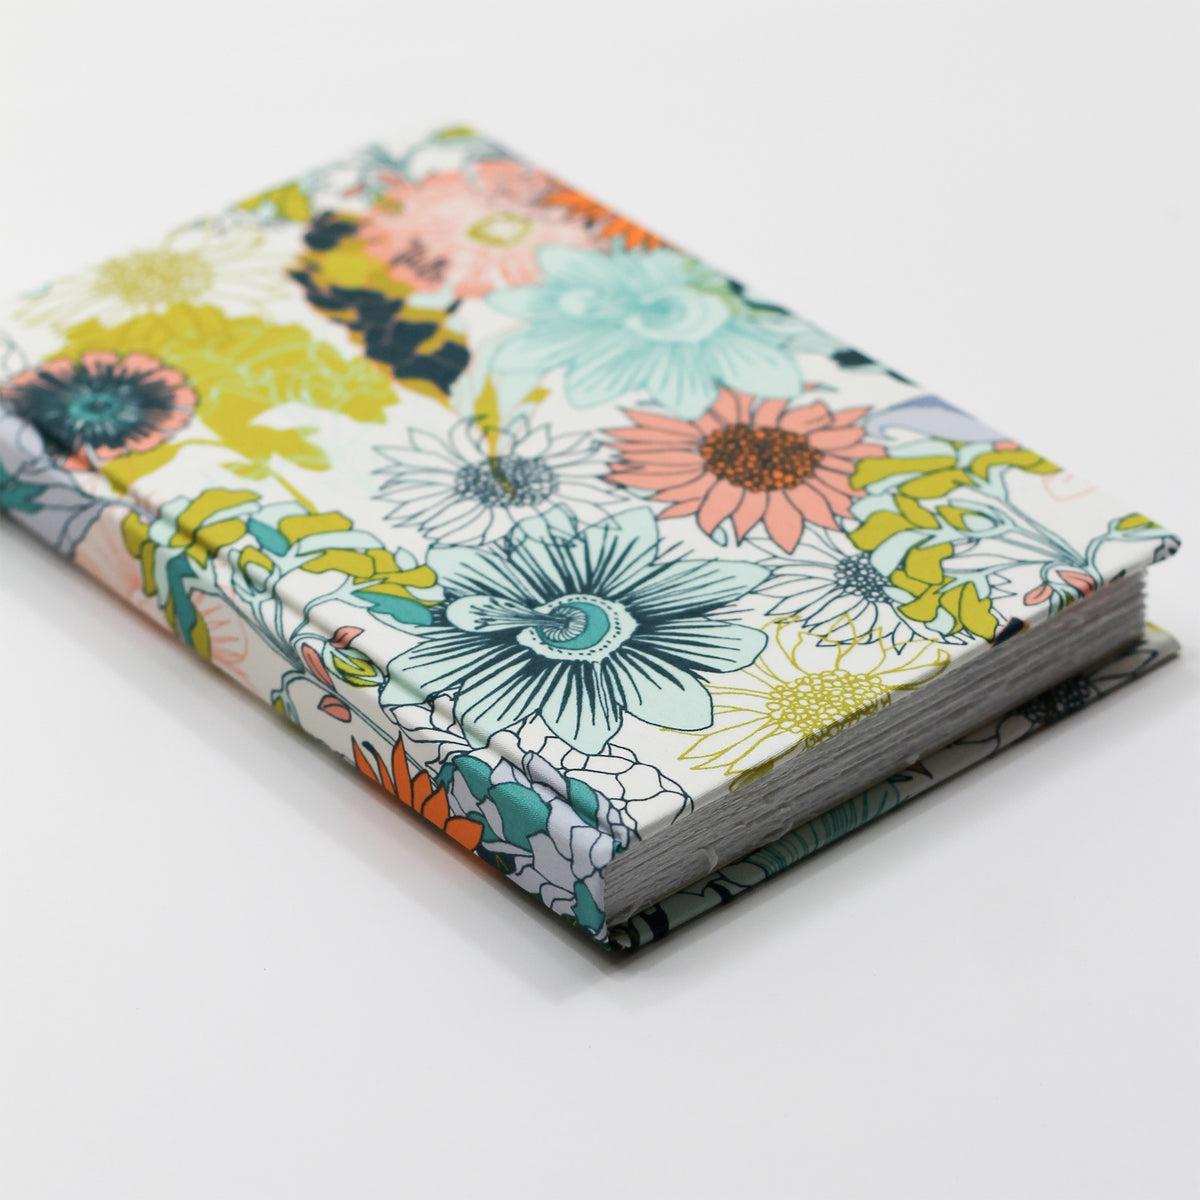 Medium 5.5x8.5 Blank Page Journal | Cover: Retro Floral